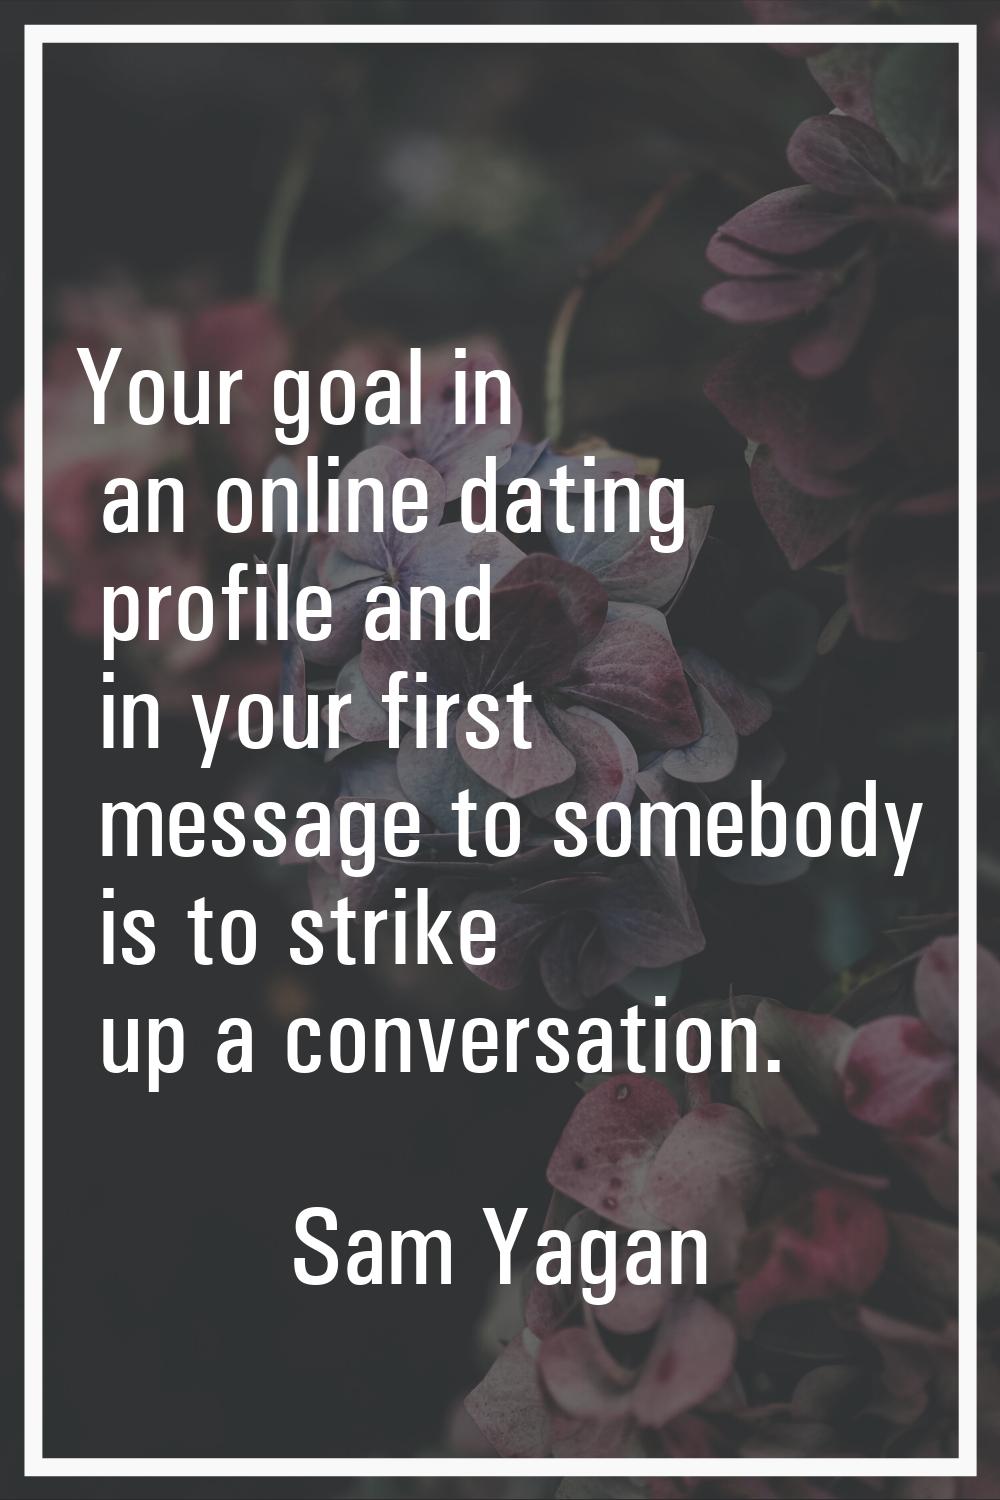 Your goal in an online dating profile and in your first message to somebody is to strike up a conve